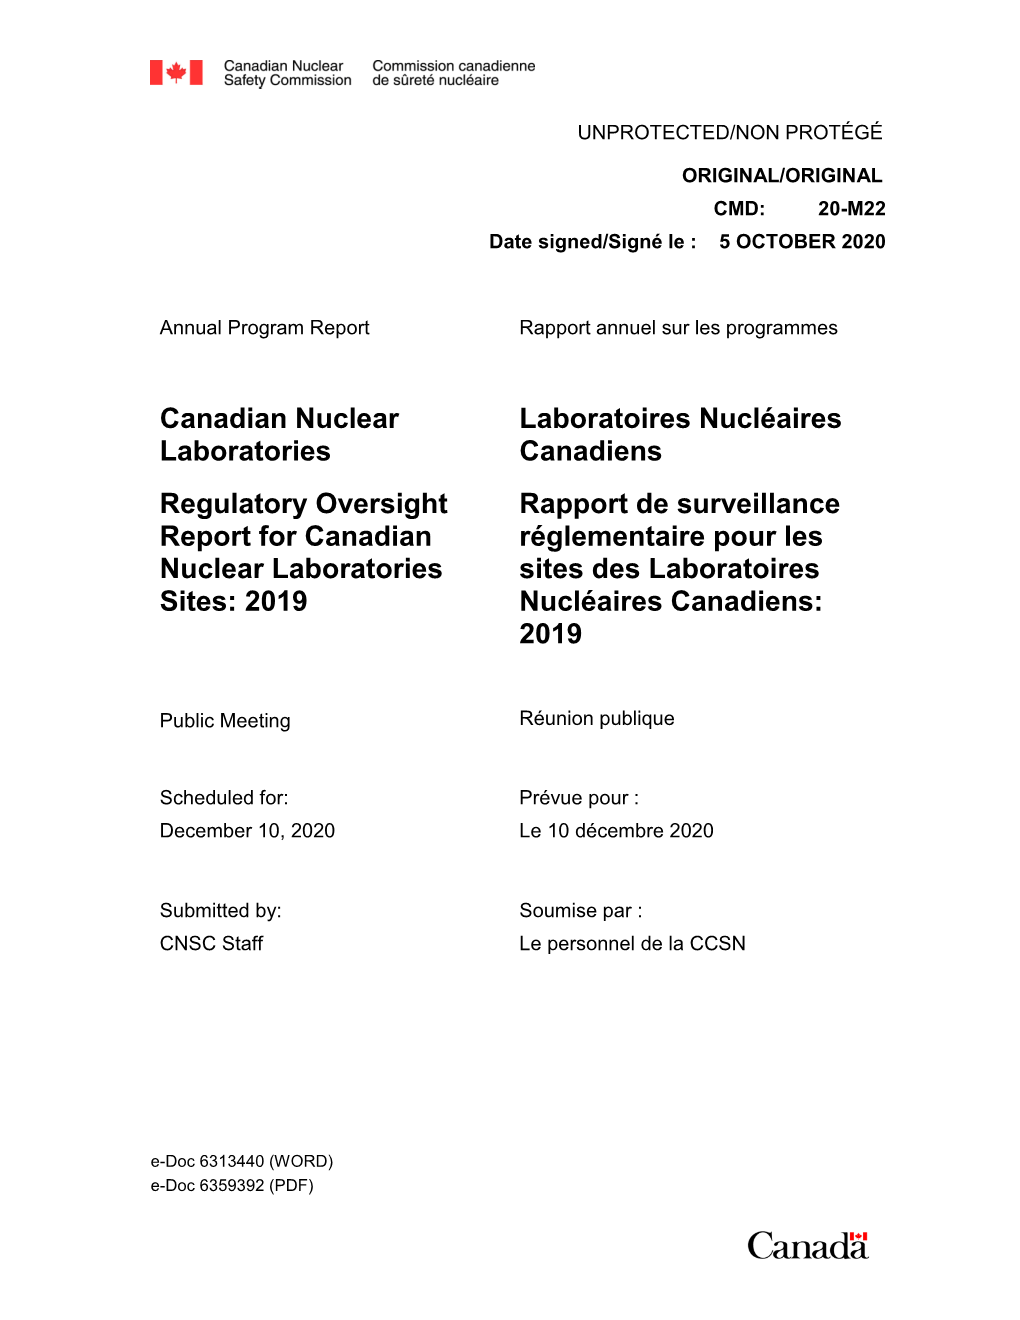 Canadian Nuclear Laboratories Regulatory Oversight Report For